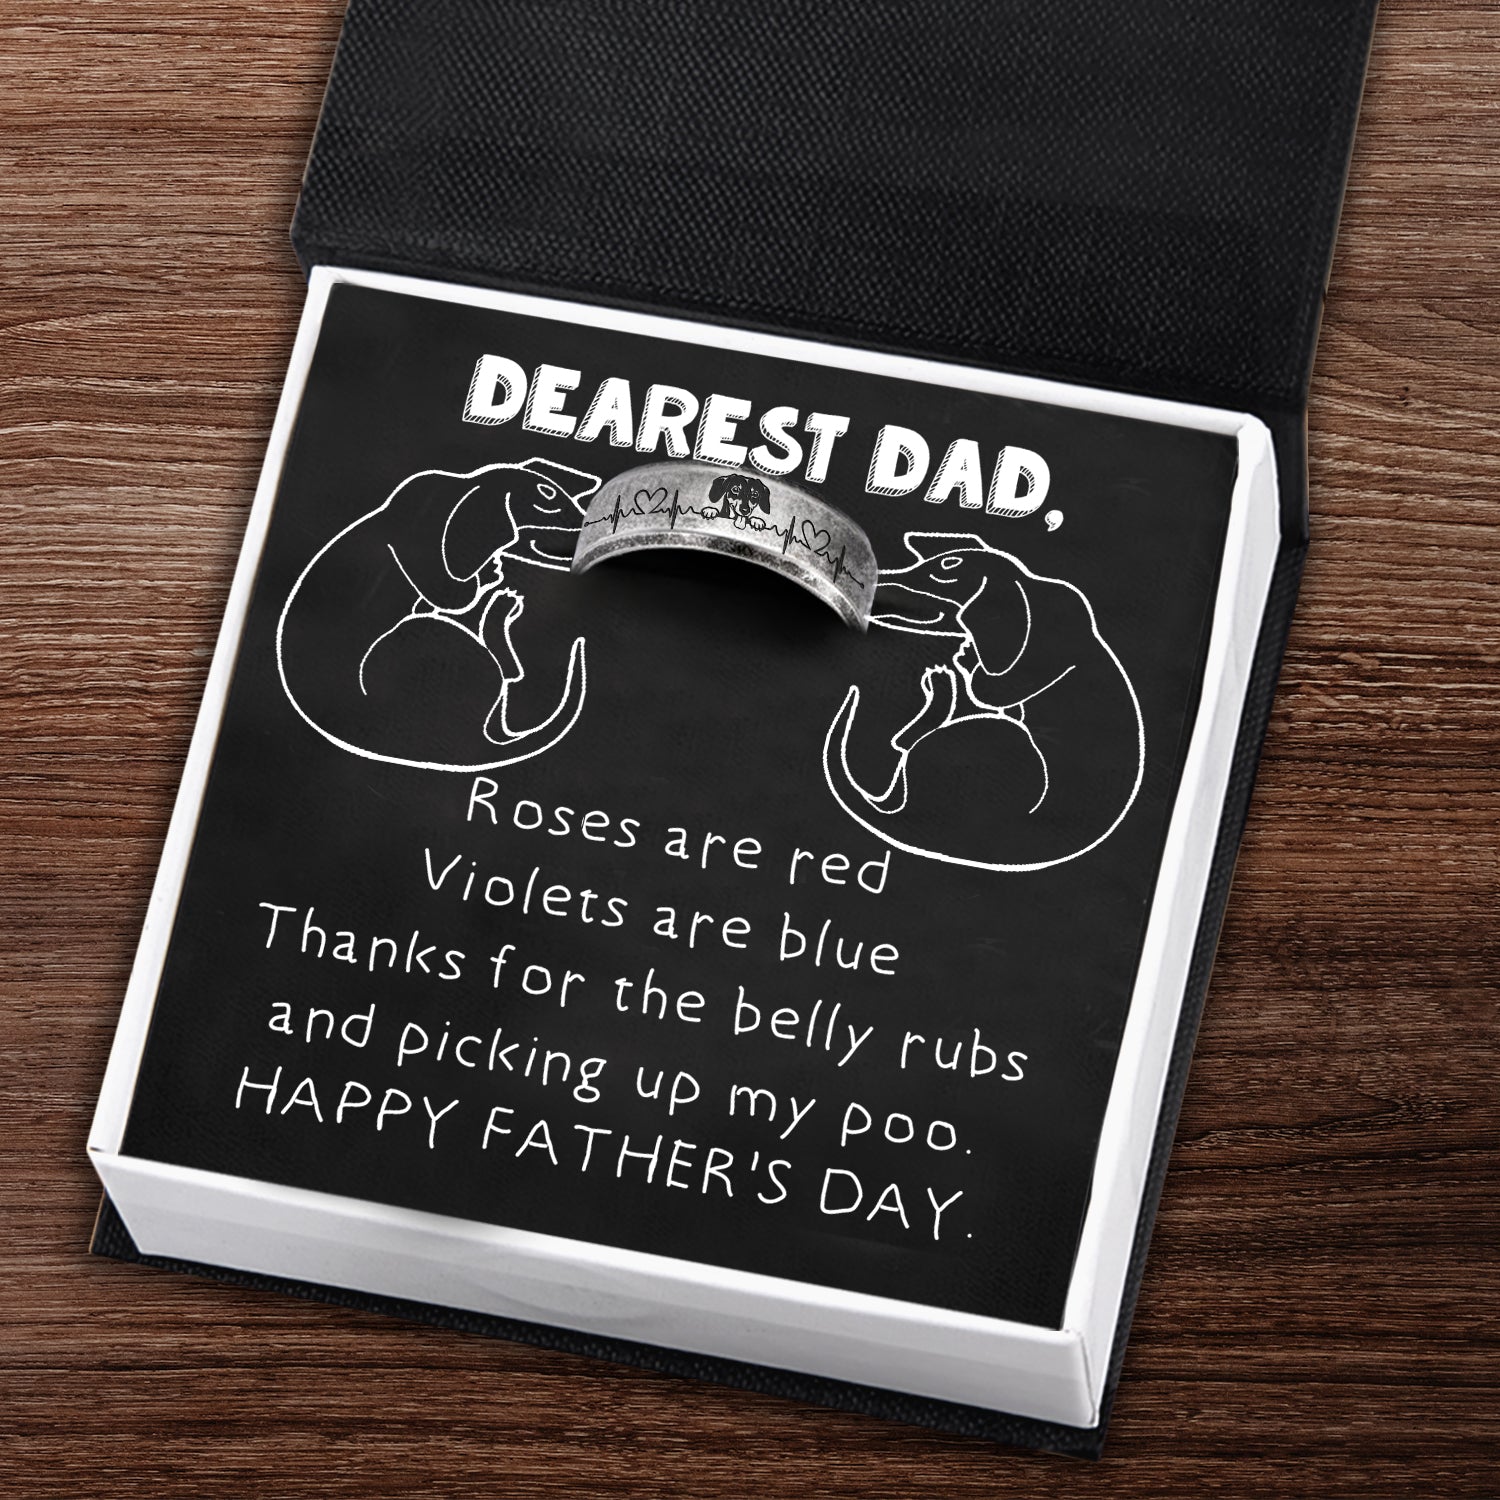 Steel Ring - Dachshund - Dearest Dad - Happy Father's Day - Ukgri26009